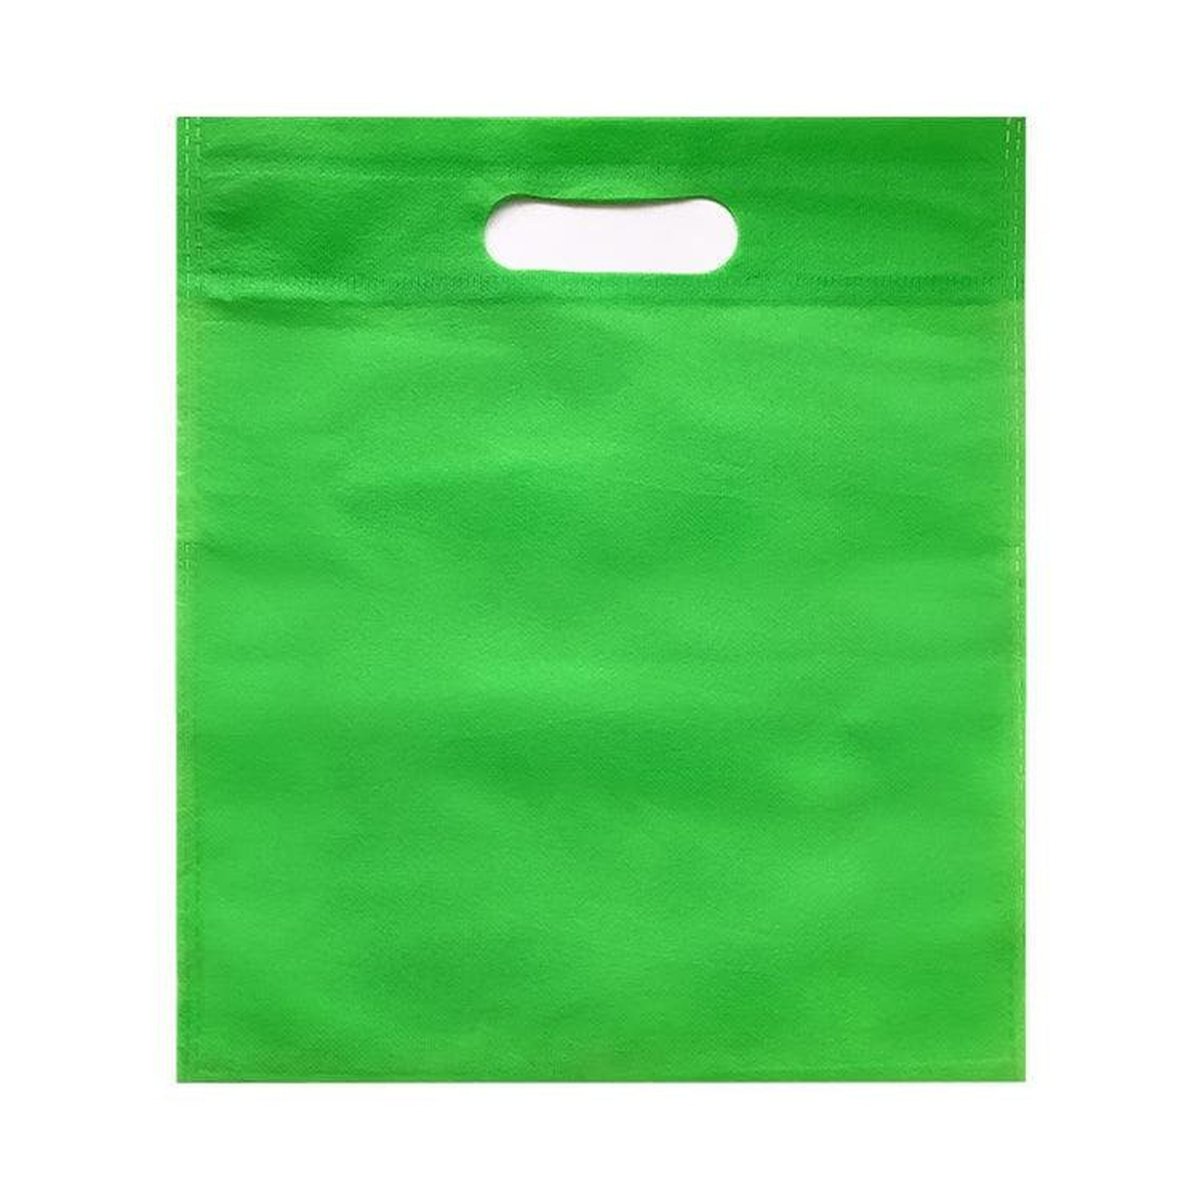 Green Super Tote Bag - Kids Party Craft